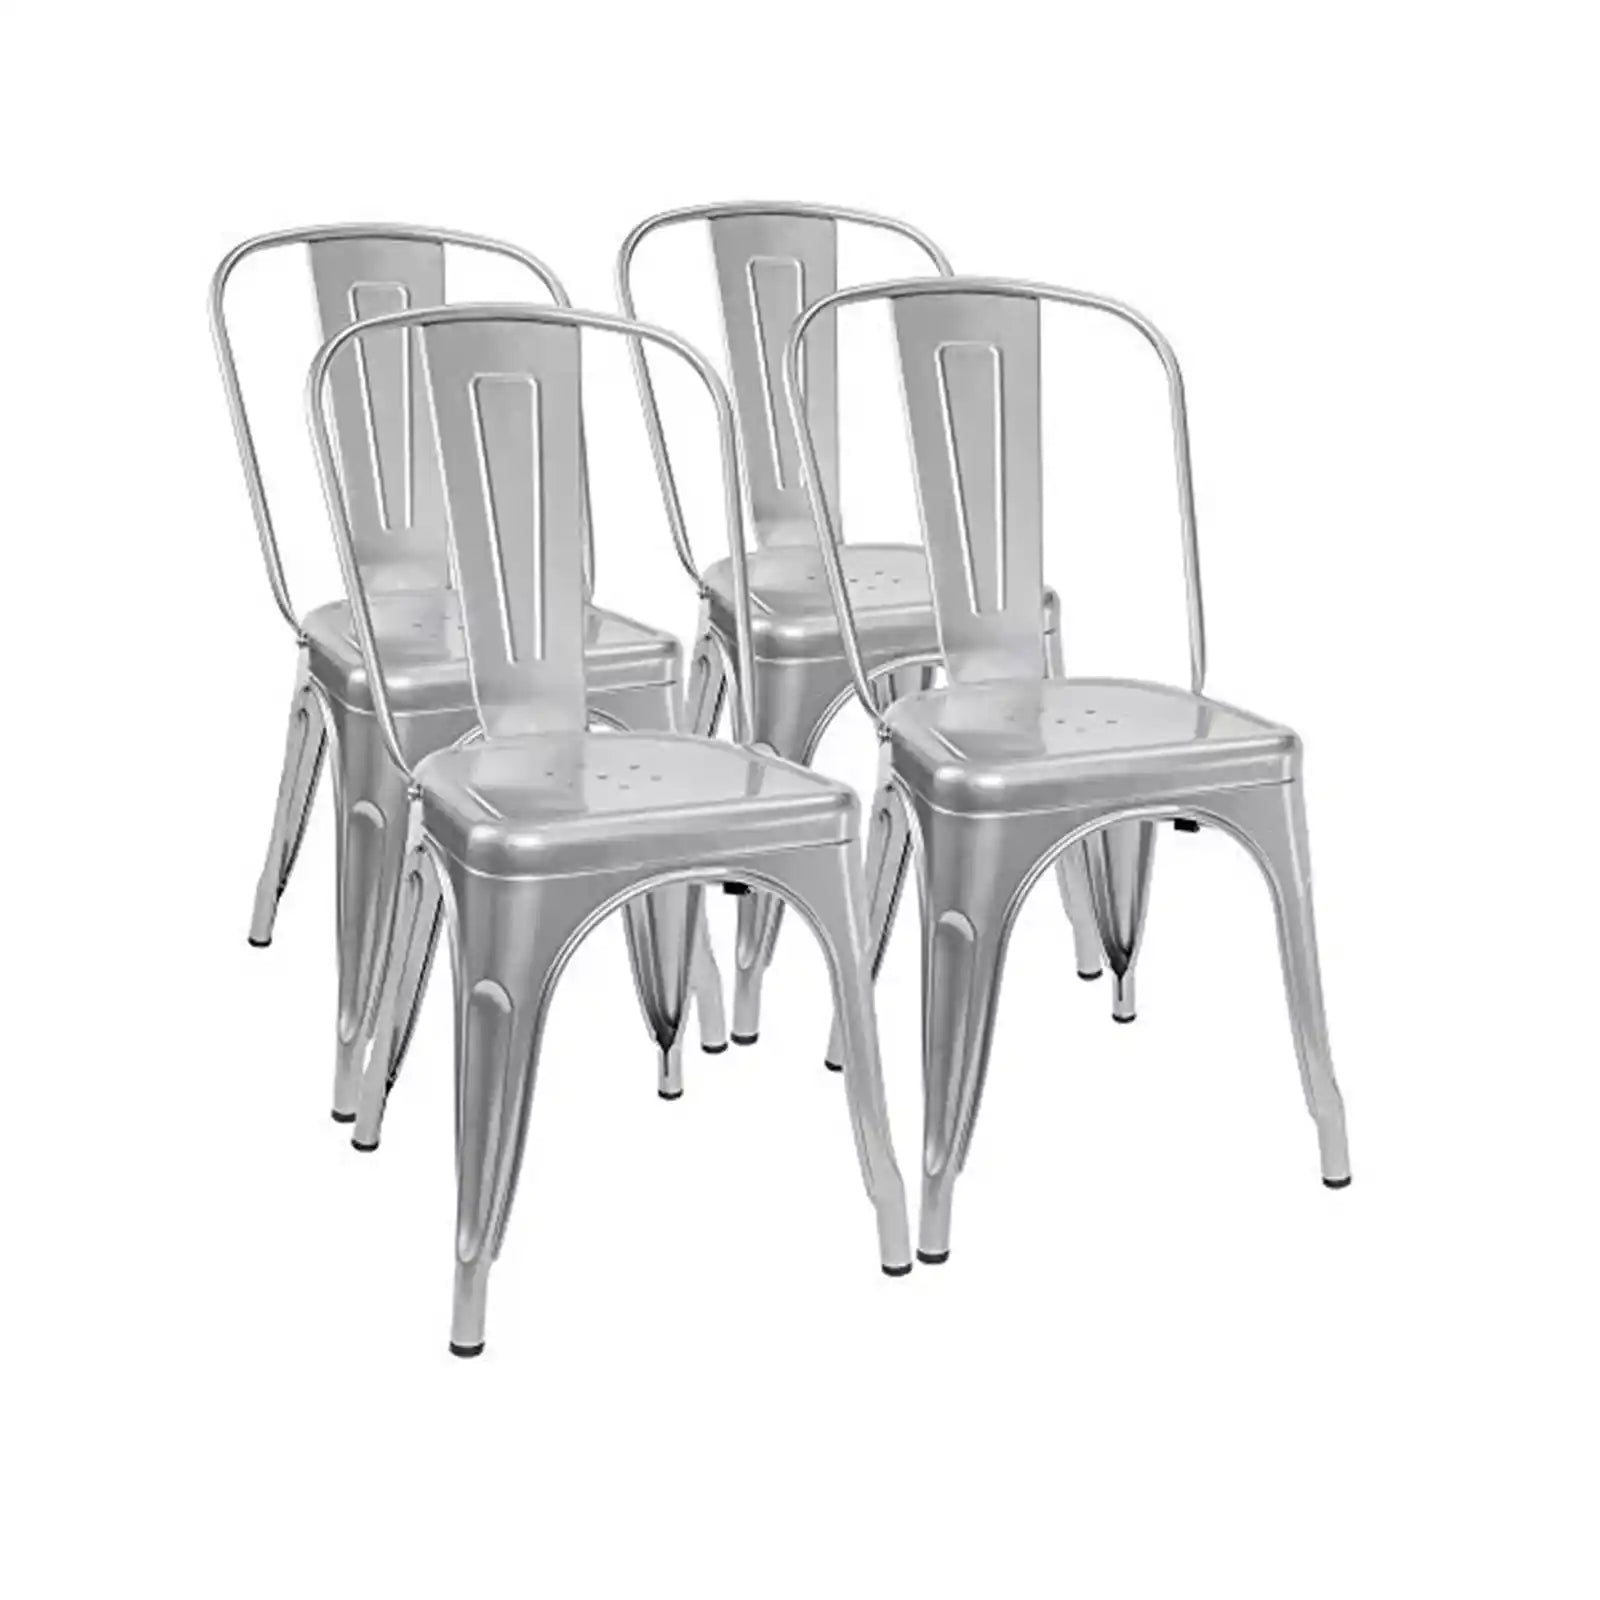 Metal Dining Chair Indoor-Outdoor Use Stackable Classic Trattoria Chair Fashion Dining Metal Side Chairs for Bistro Cafe Restaurant Set of 4